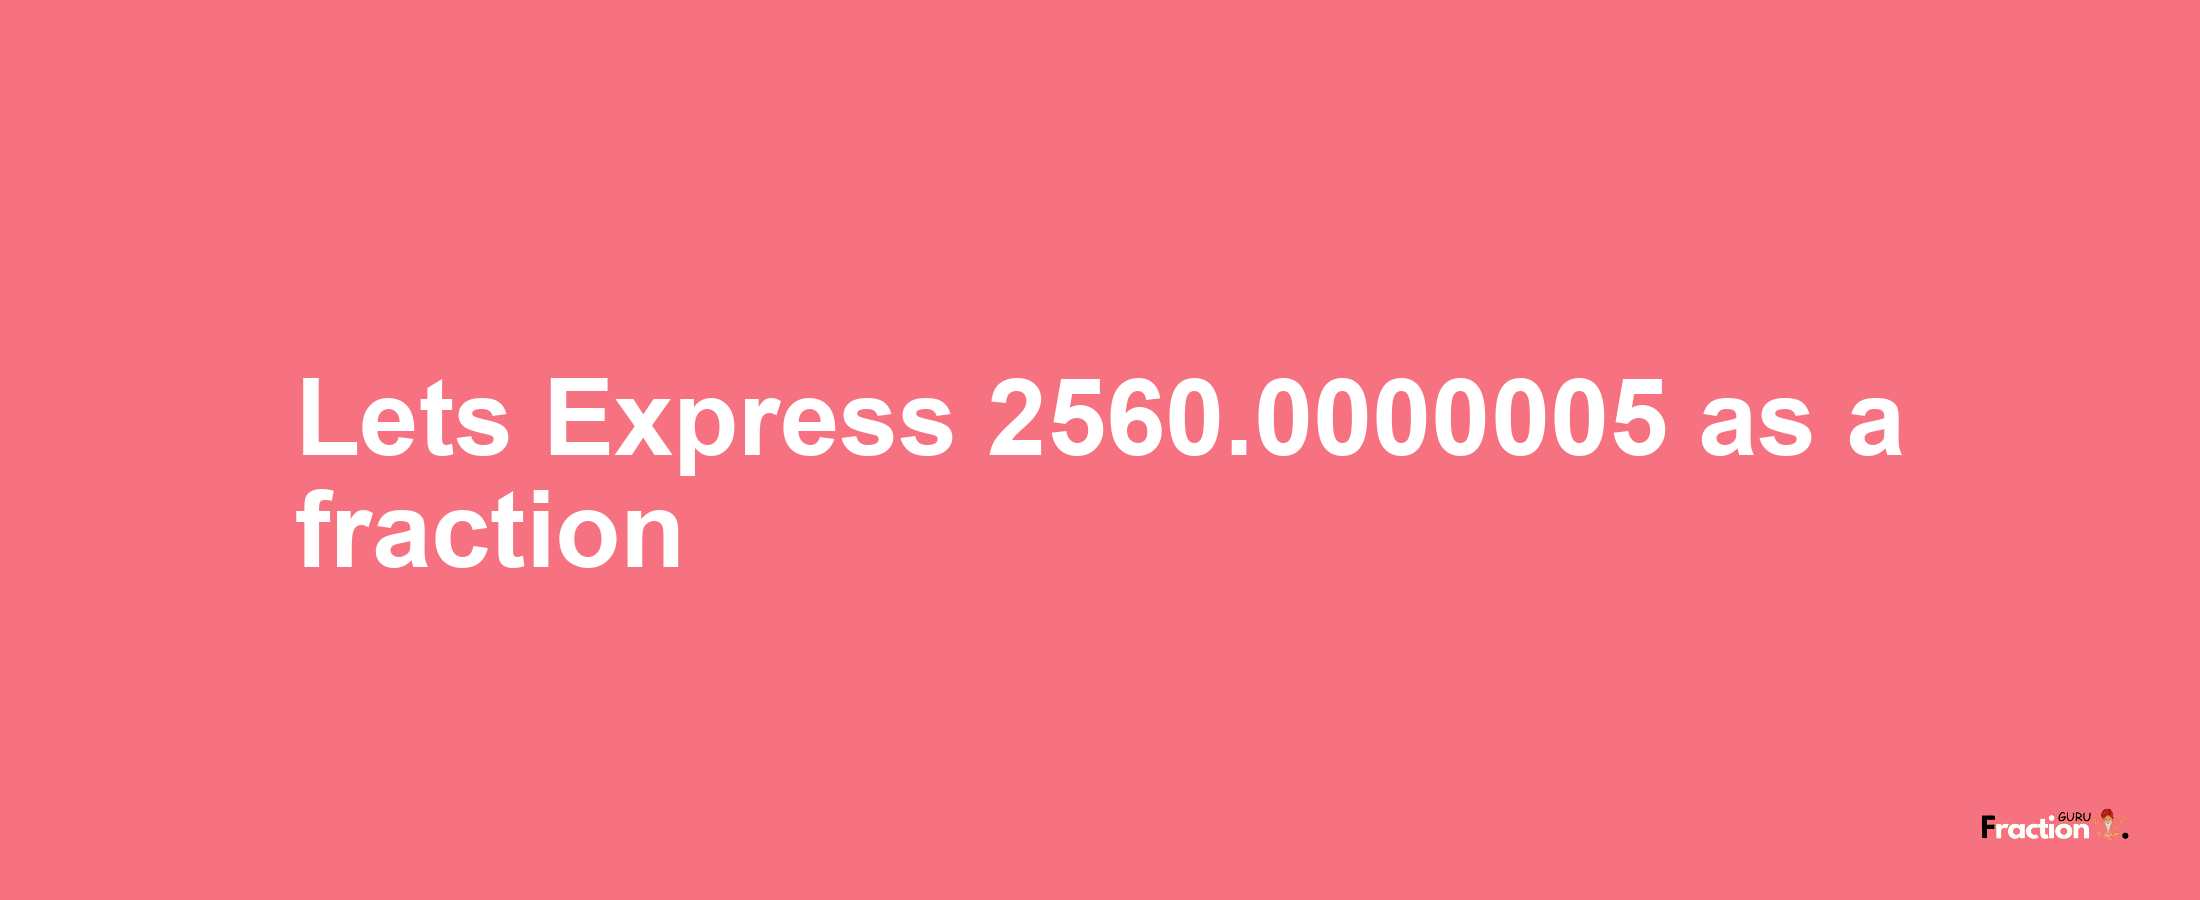 Lets Express 2560.0000005 as afraction